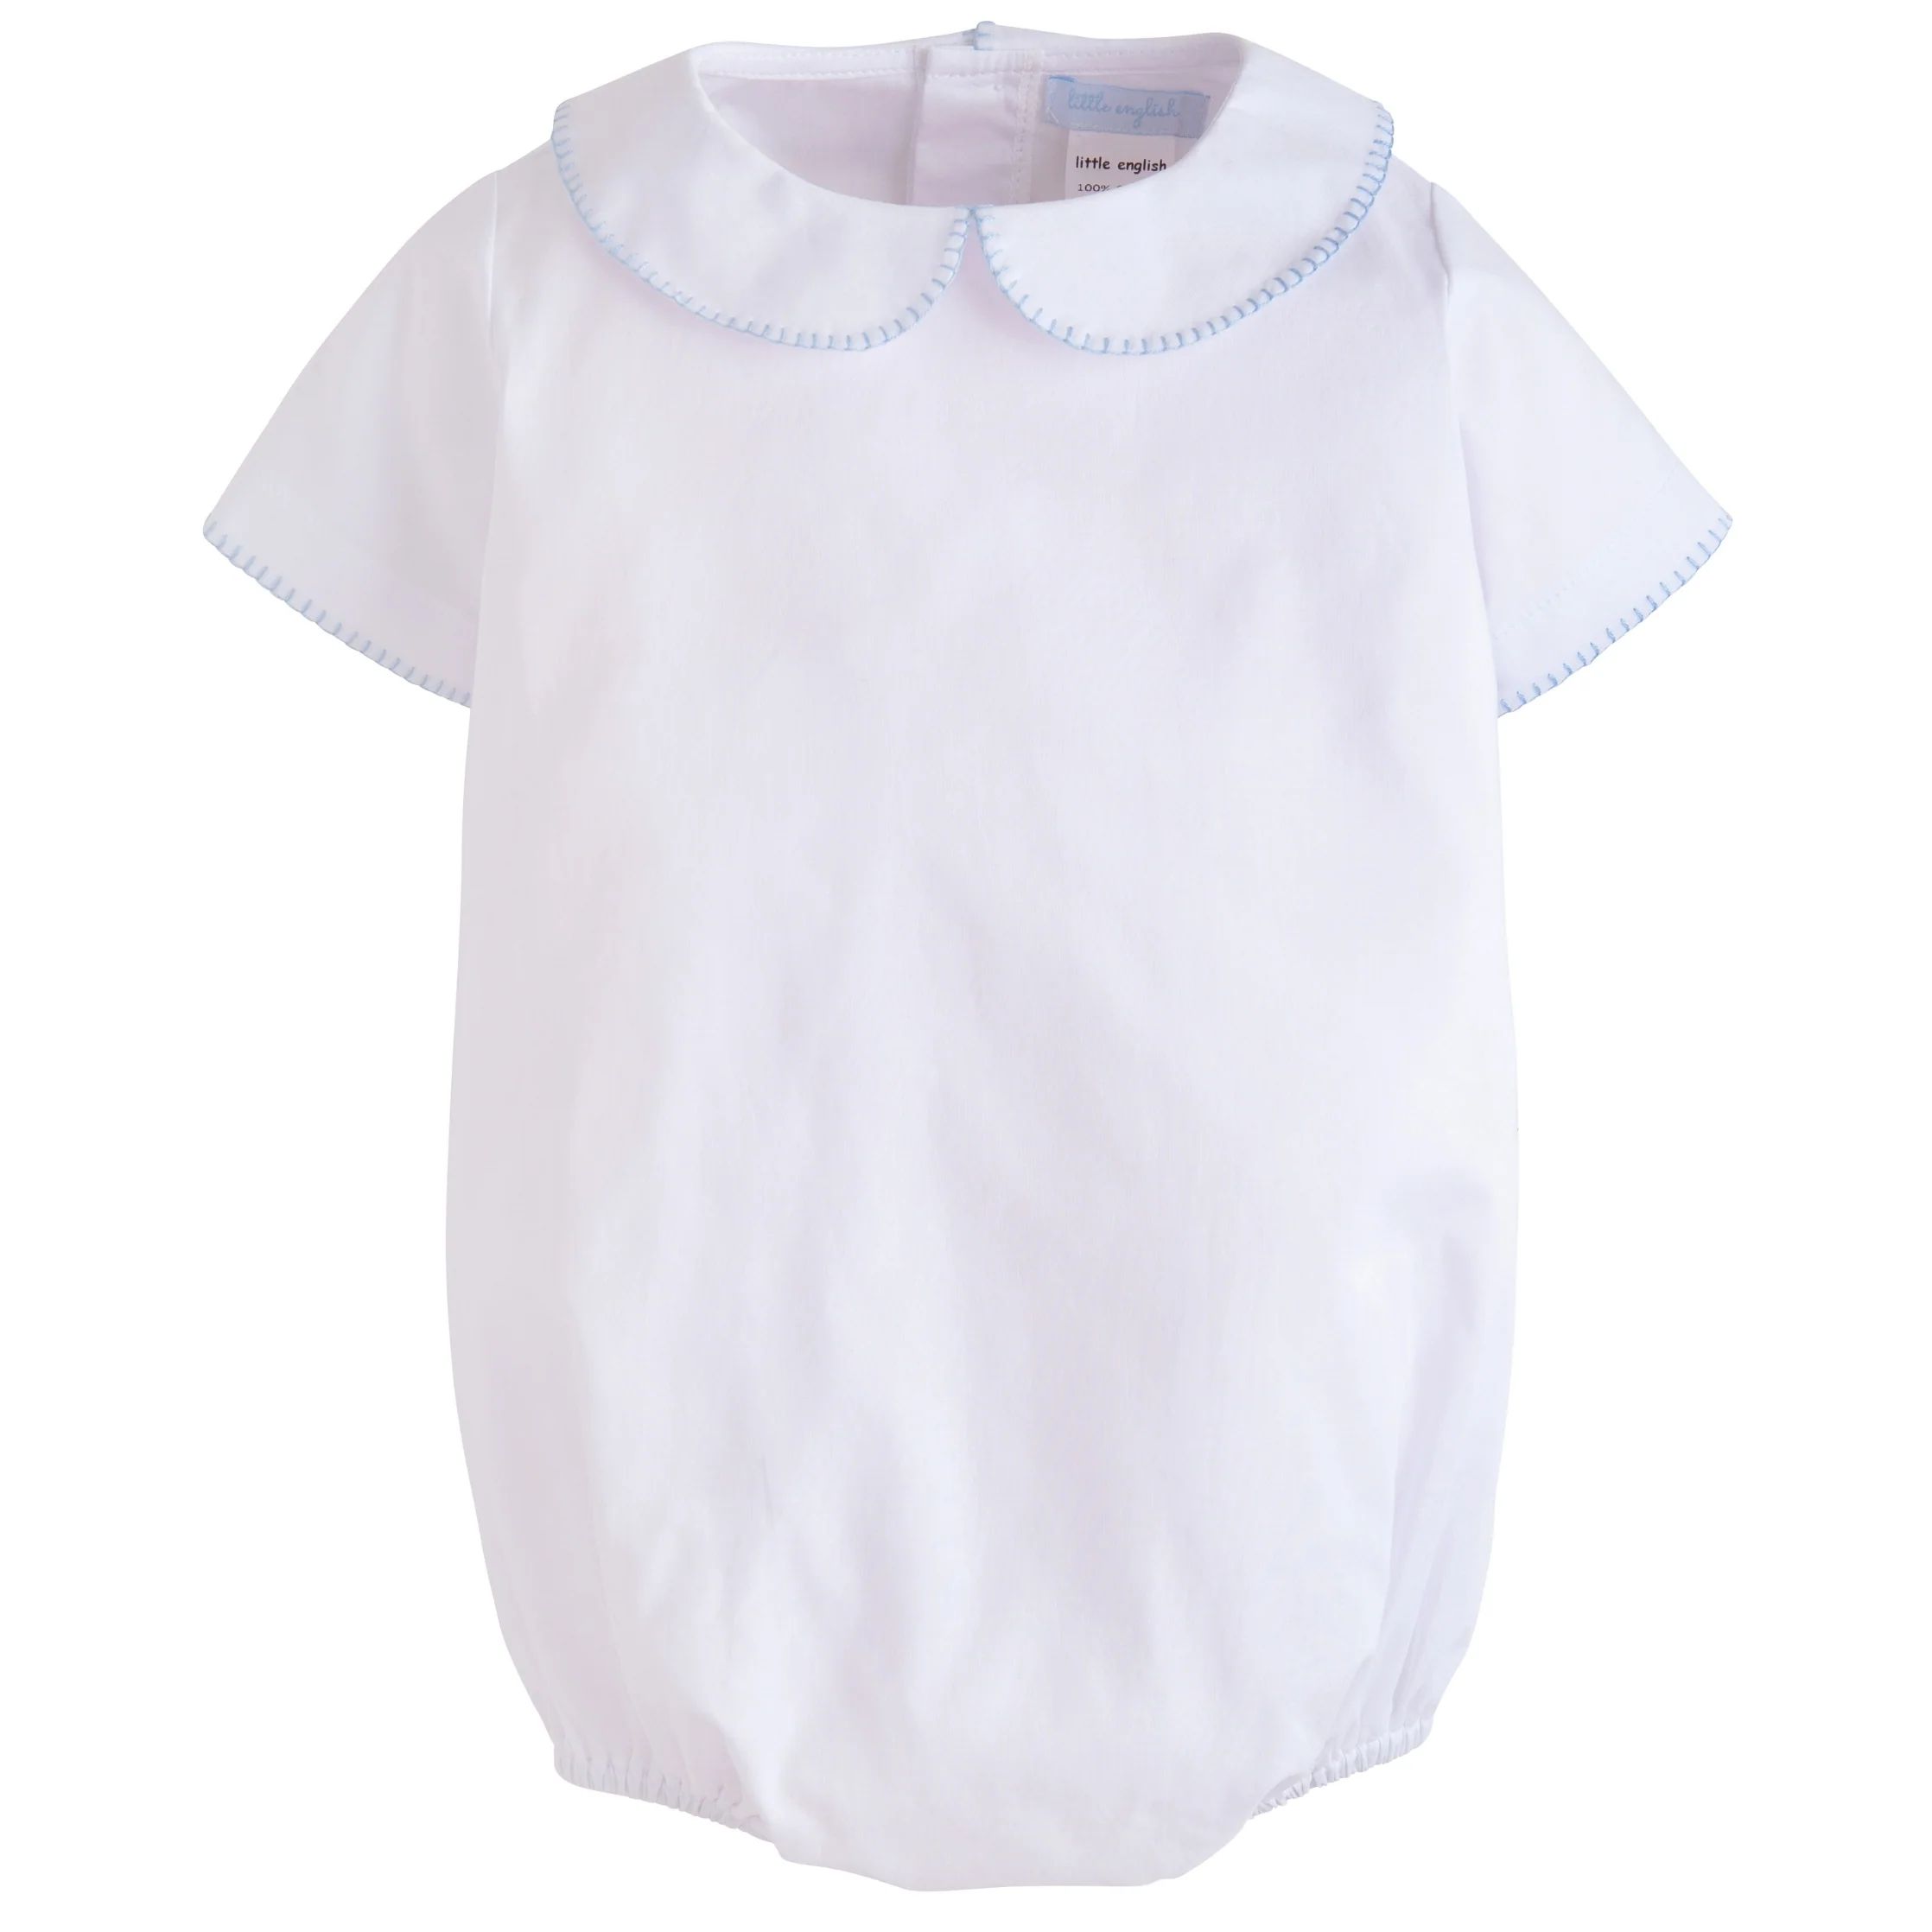 Bubble Baby Clothes - Infant Boys Clothing | Little English